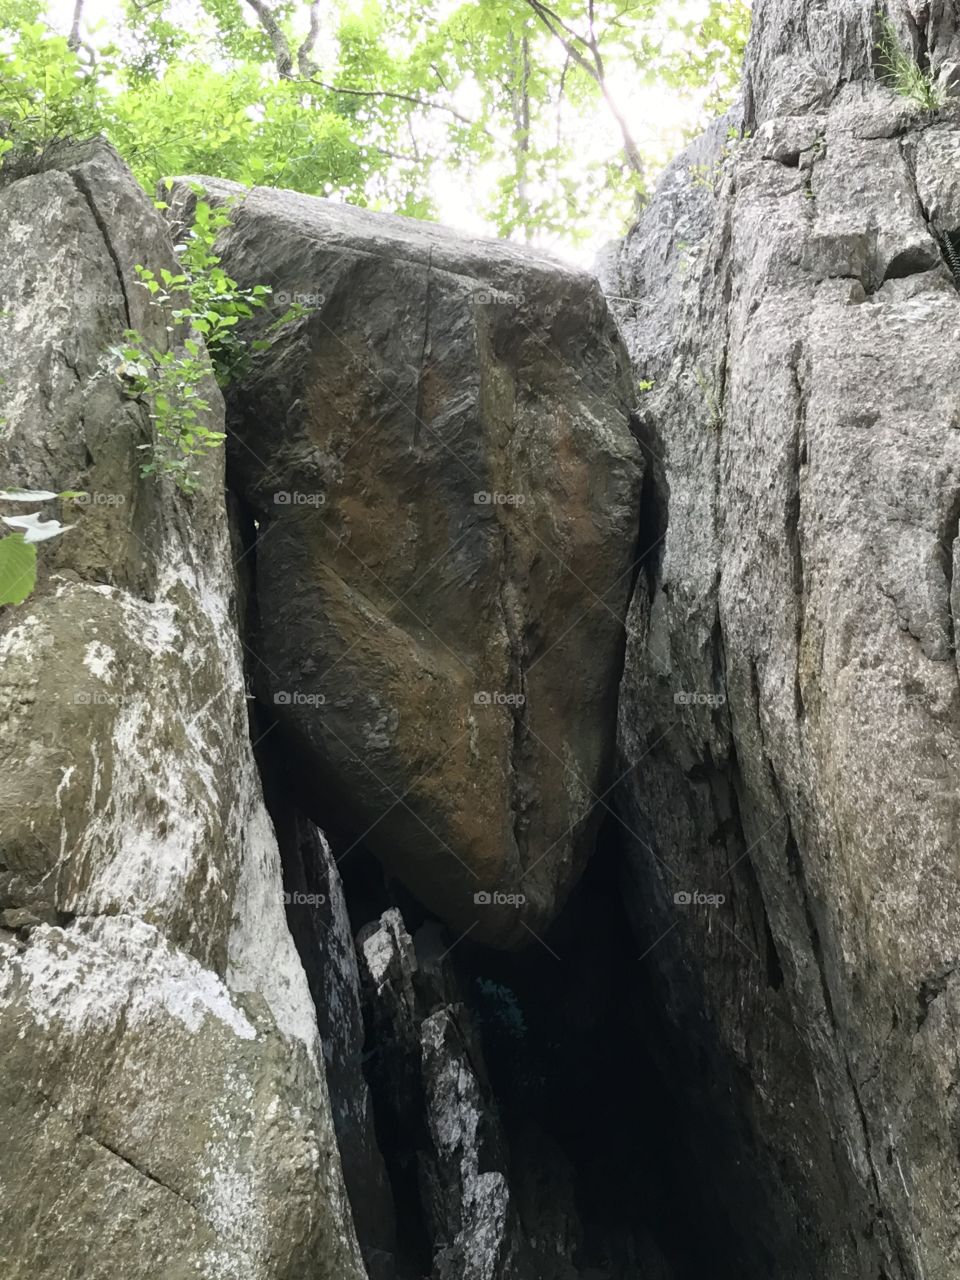 Caught between a rock and a hard place